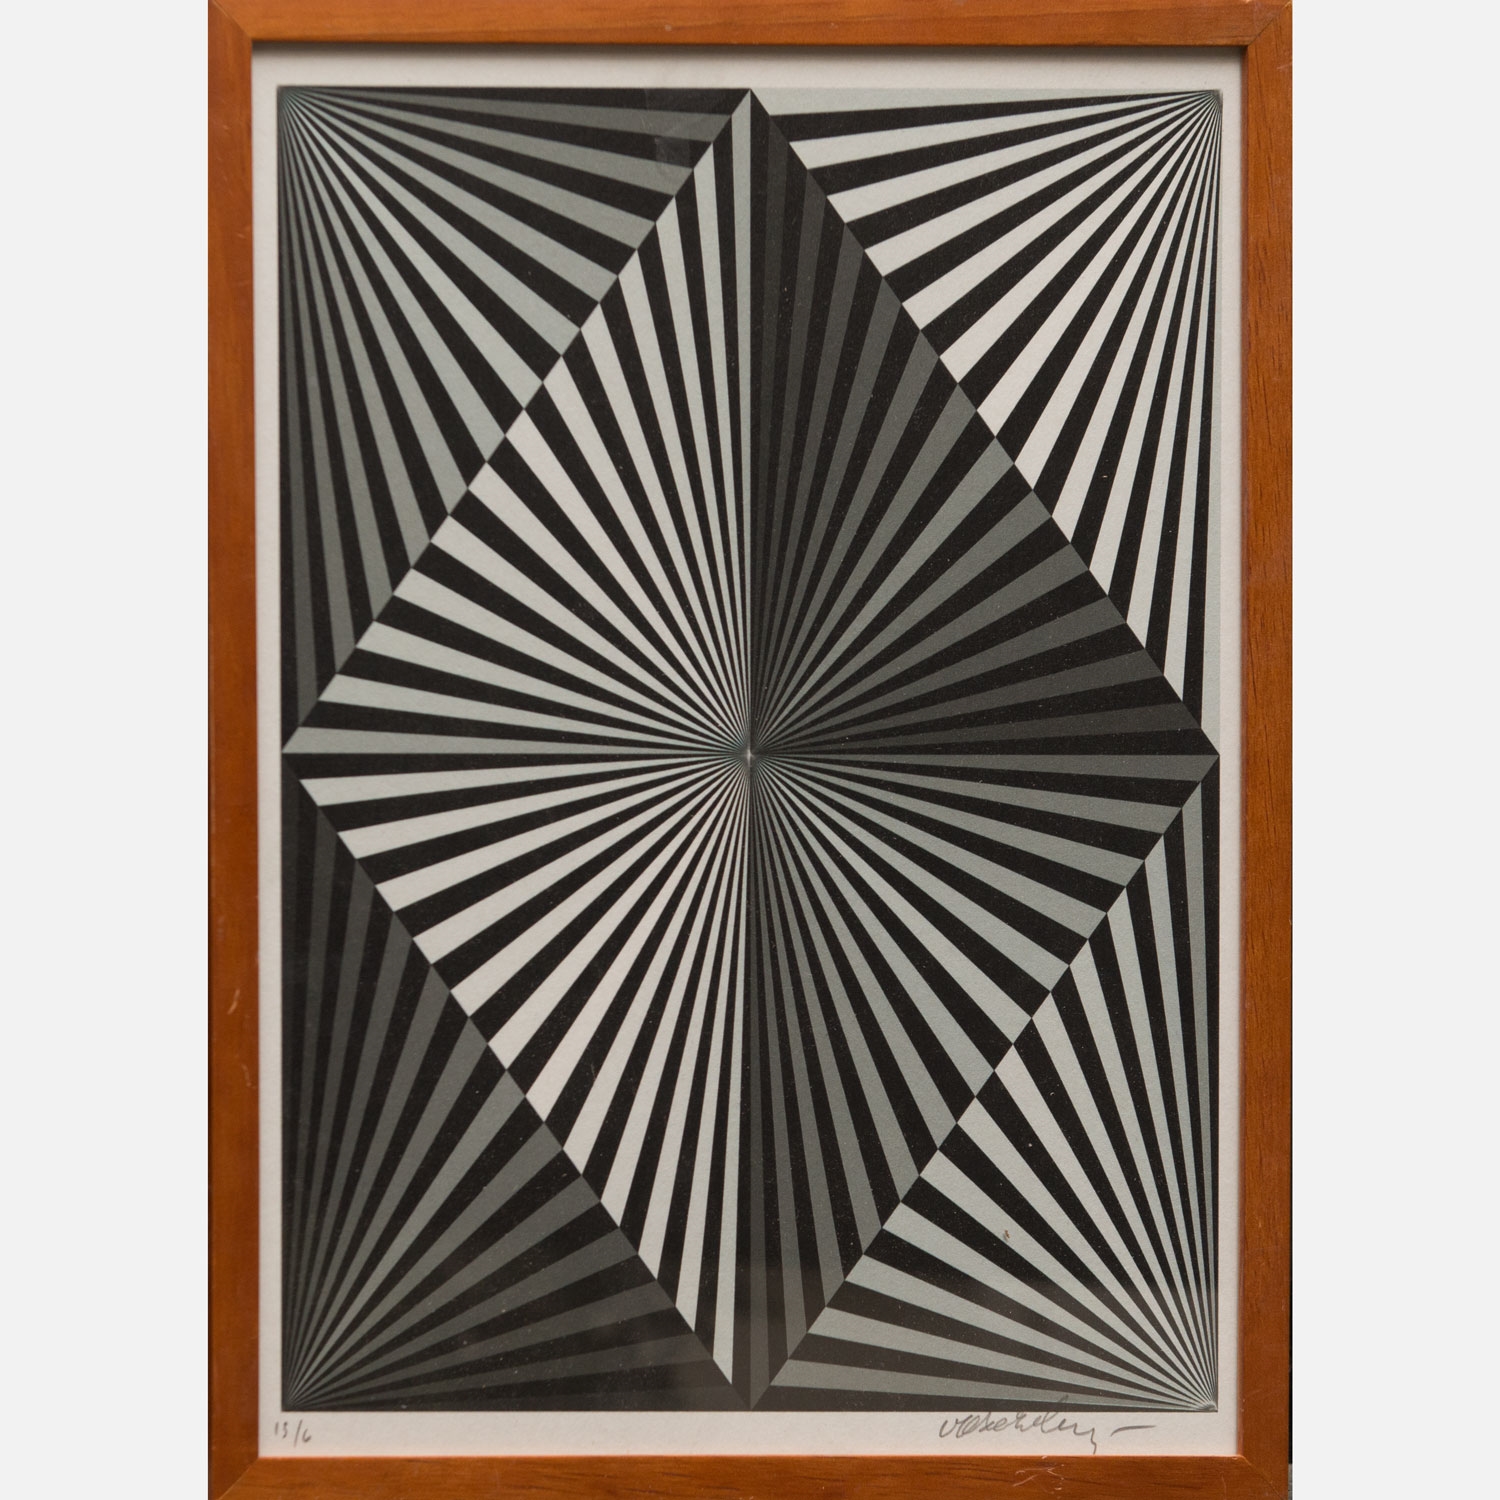 composition by Victor Vasarely